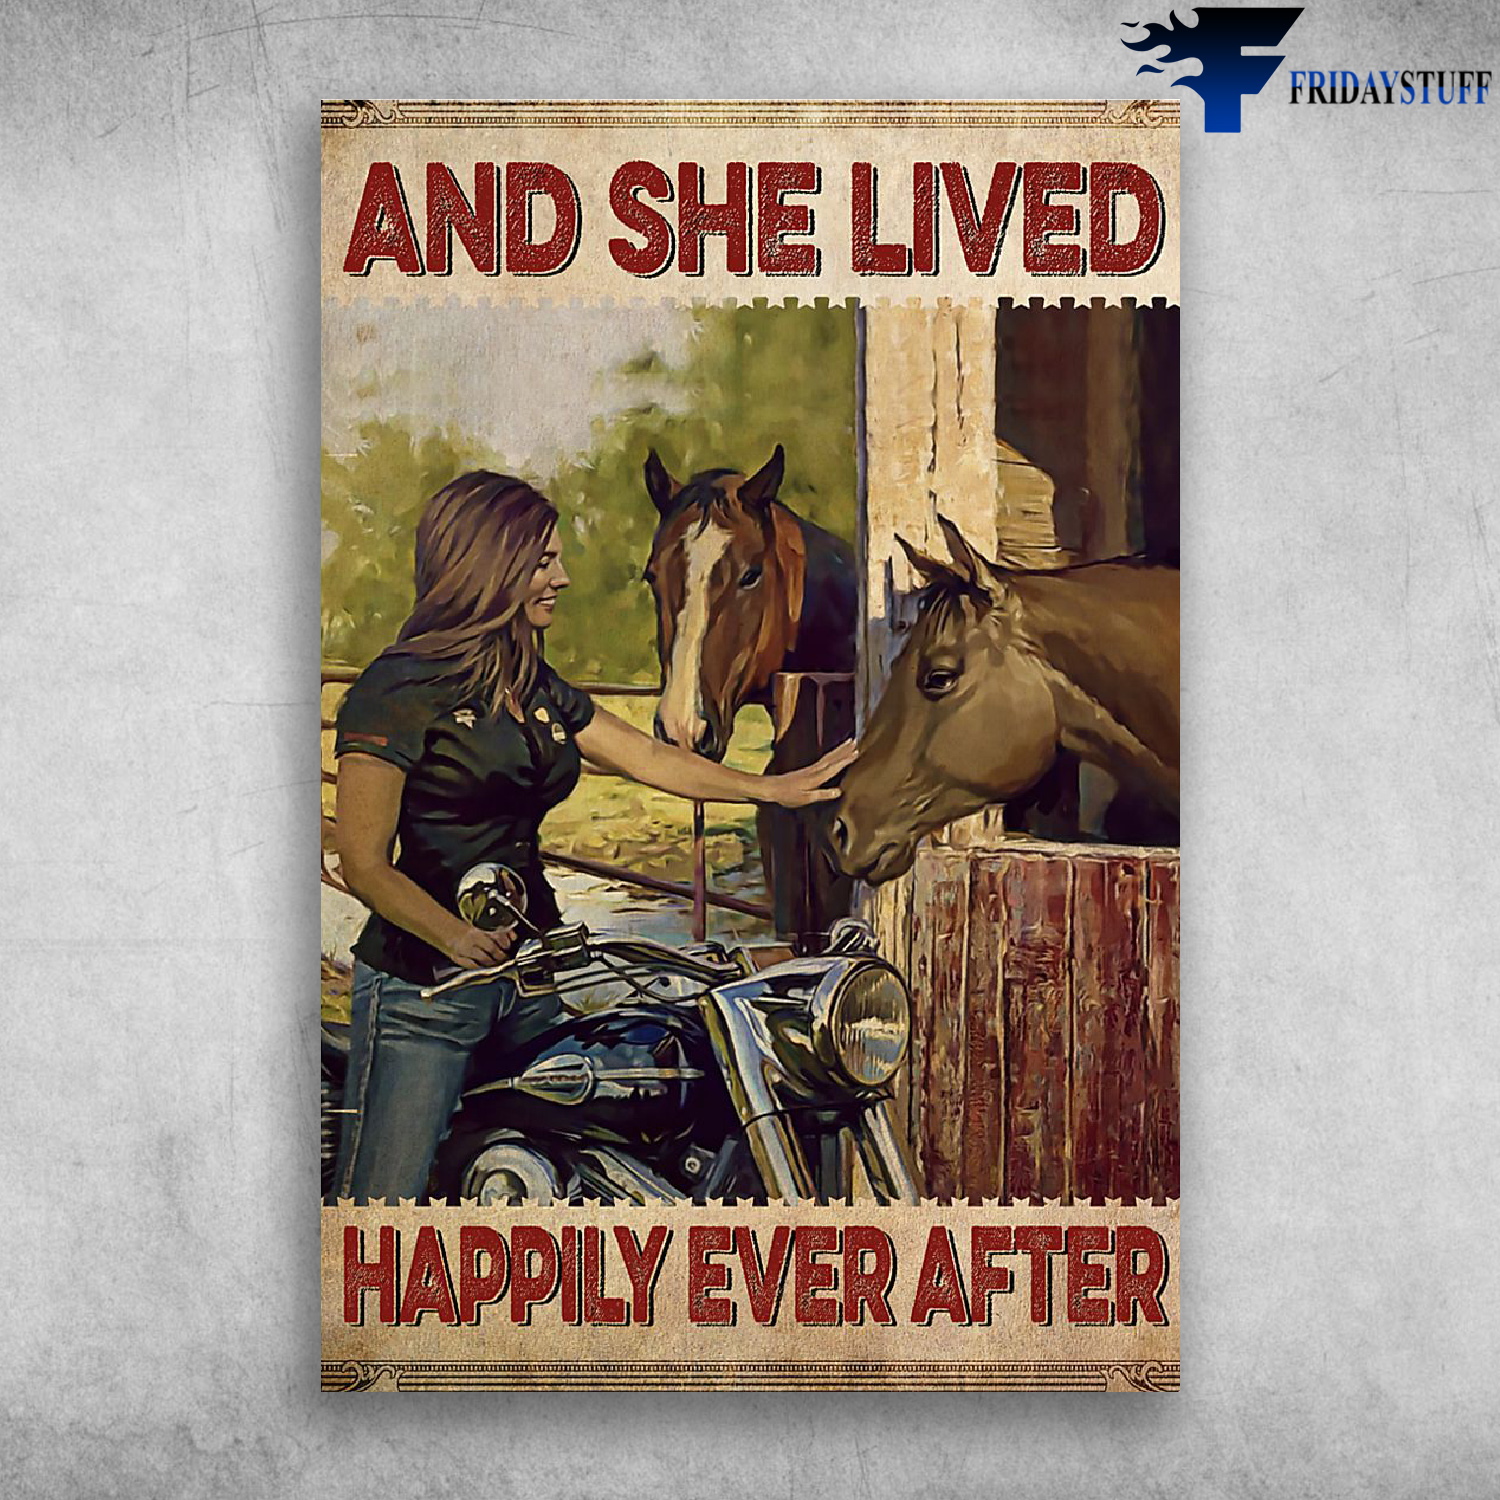 And She Lived Happily Ever After - The biker girl loves horses